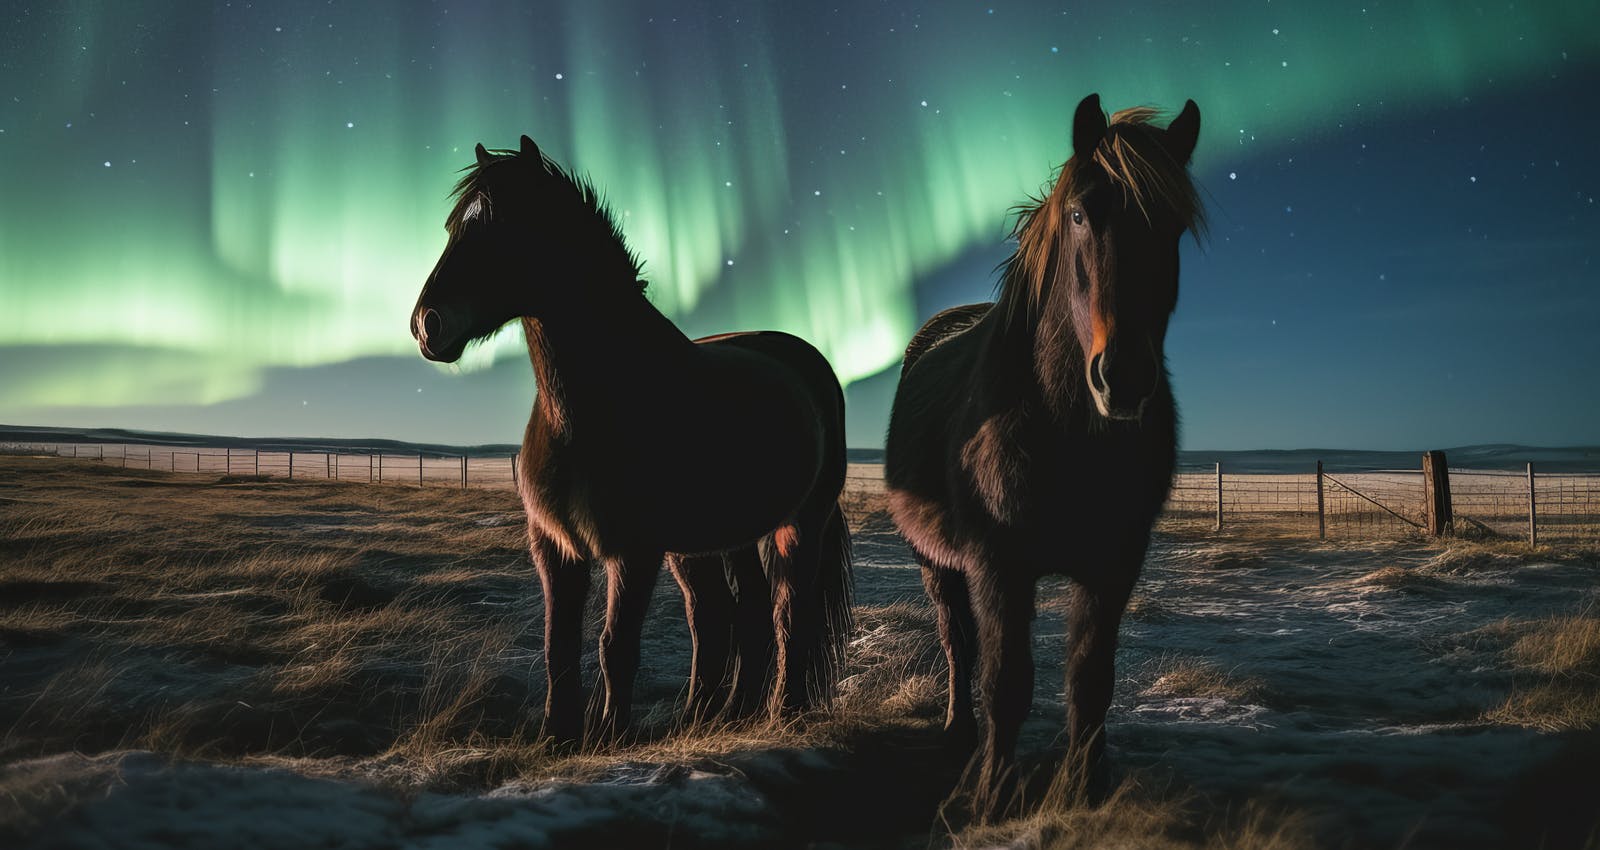 Northern lights and horses